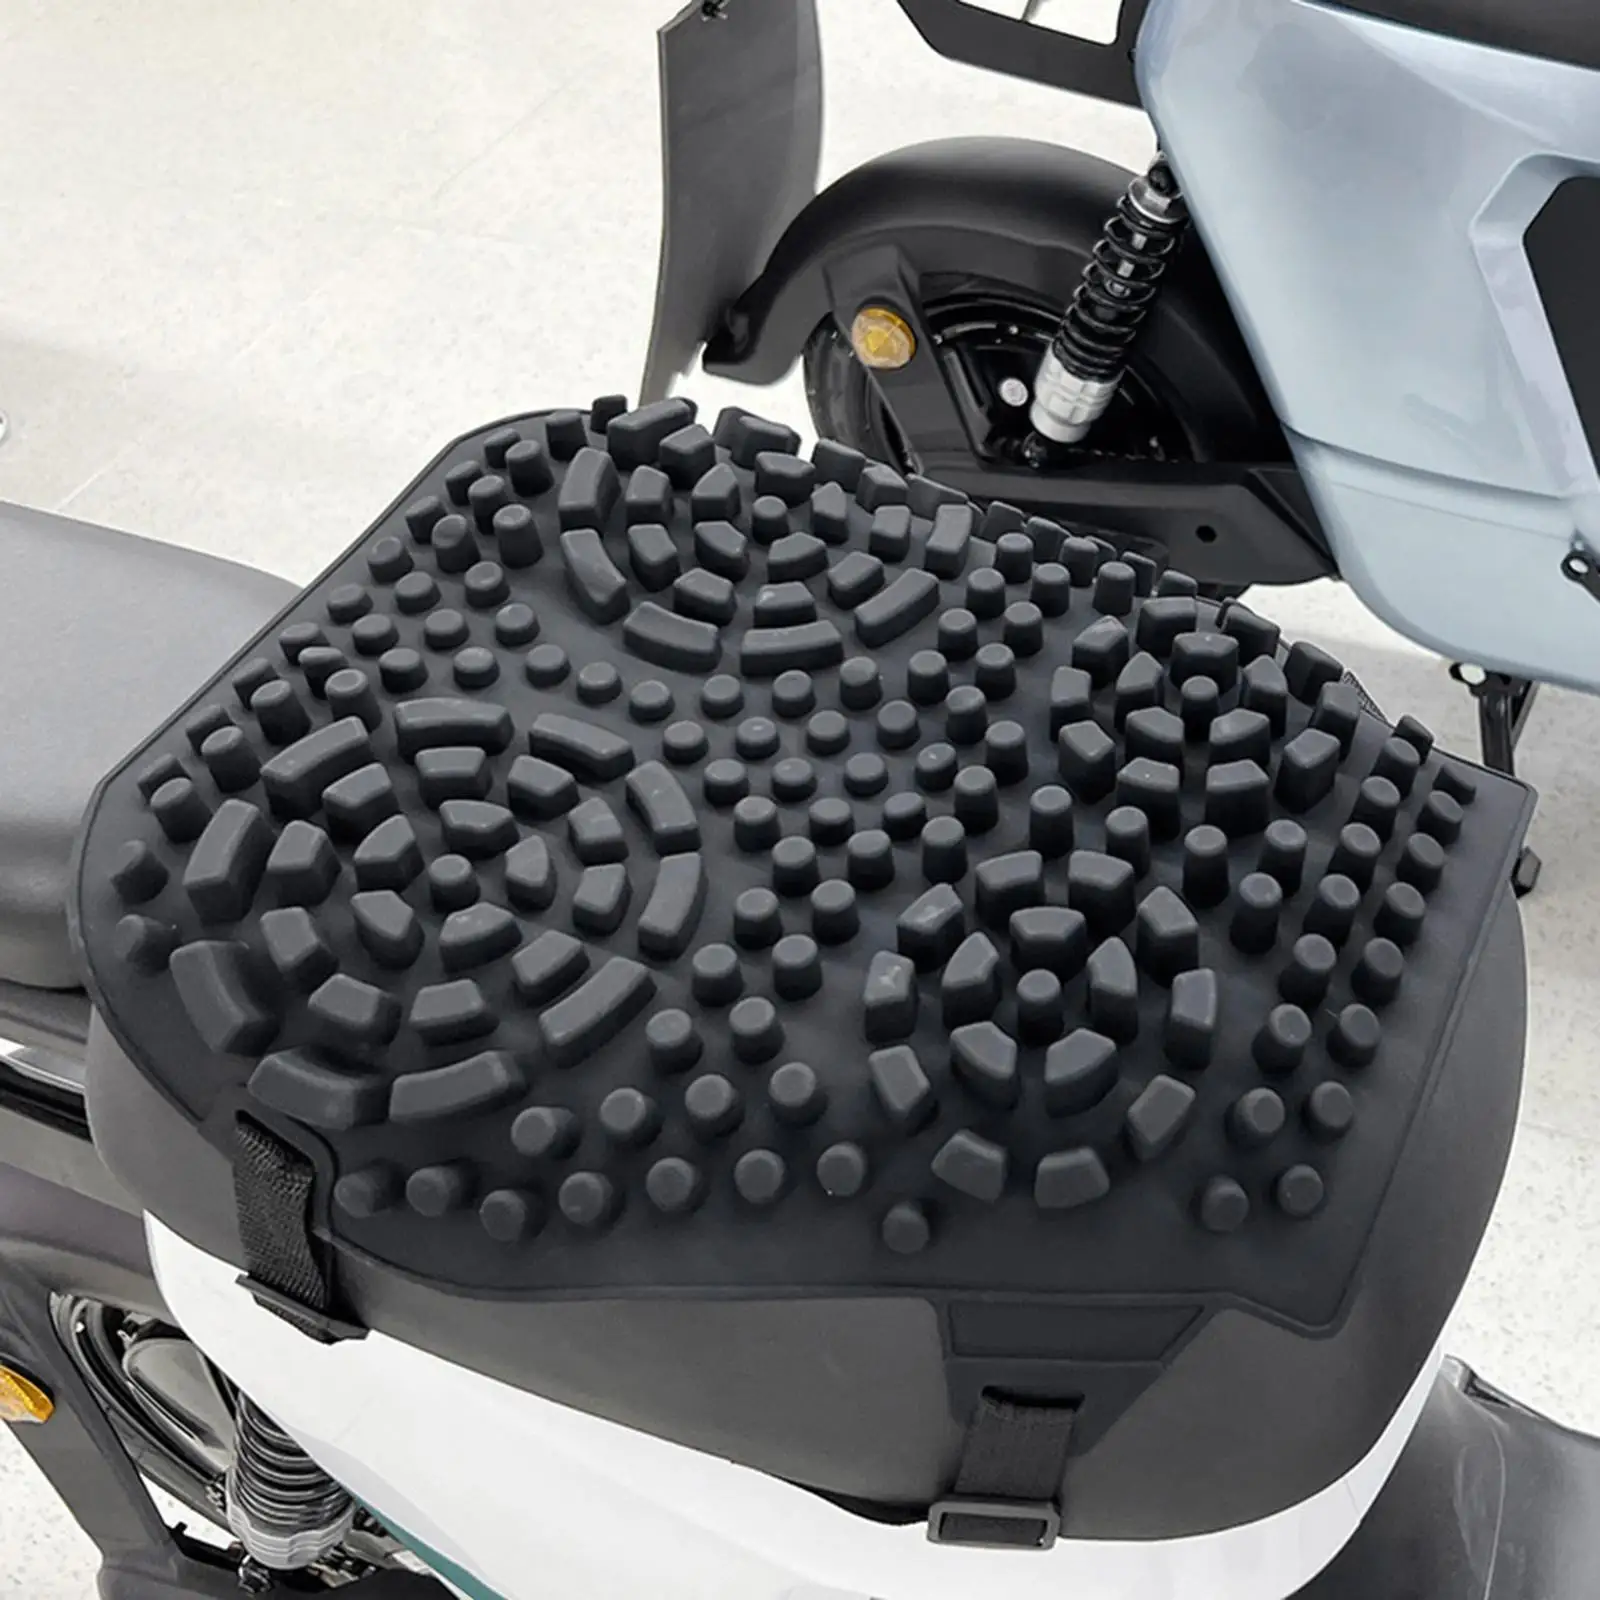 Motorcycle Seat Cushion Silicone Waterproof Shock Absorption Universal Fitment Comfortable Riding Ride Saddle Wear Resistant